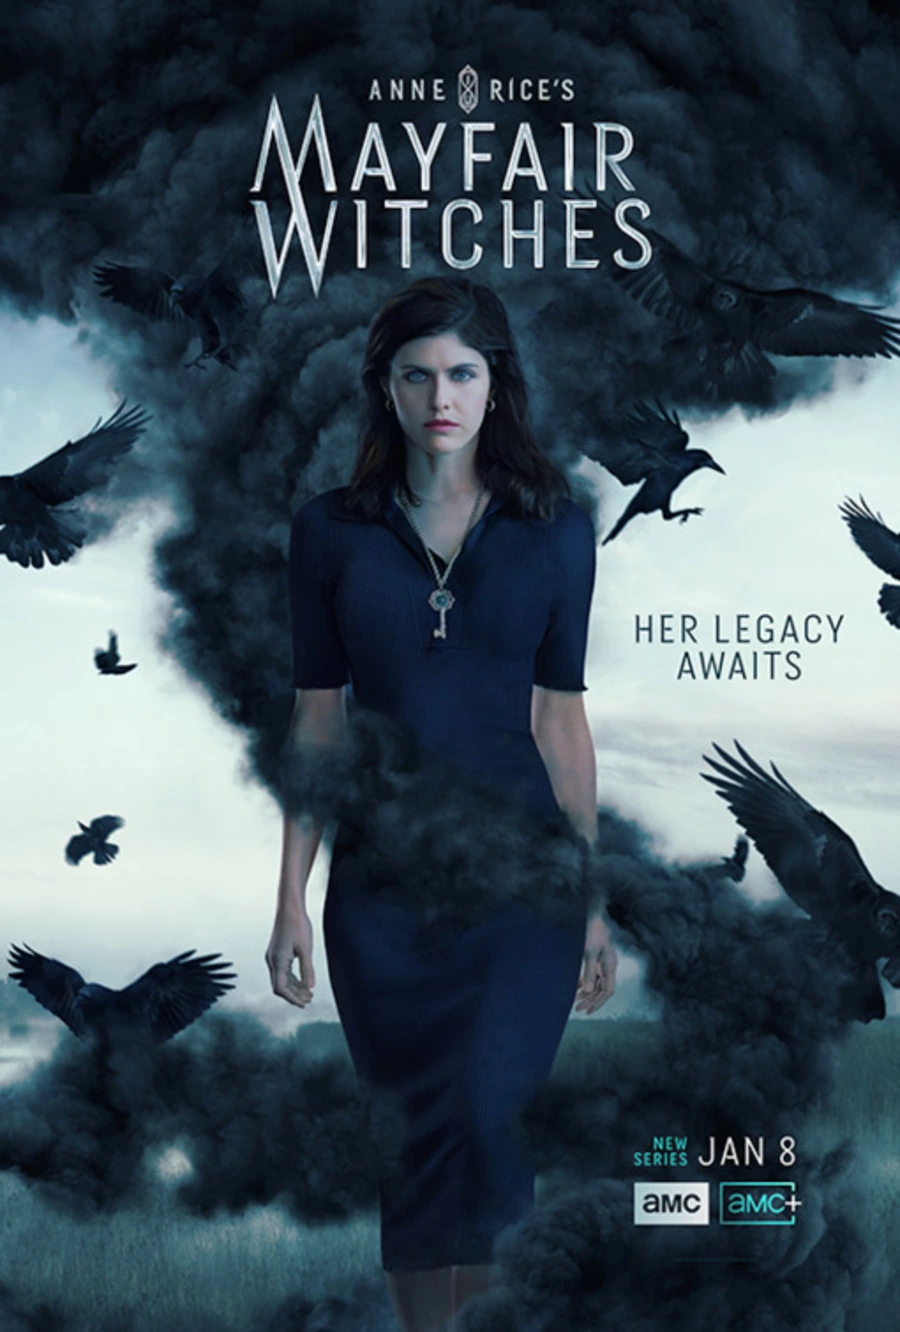 5706 alexandra daddario on the poster for the mystical series anne rice s mayfair witches based o